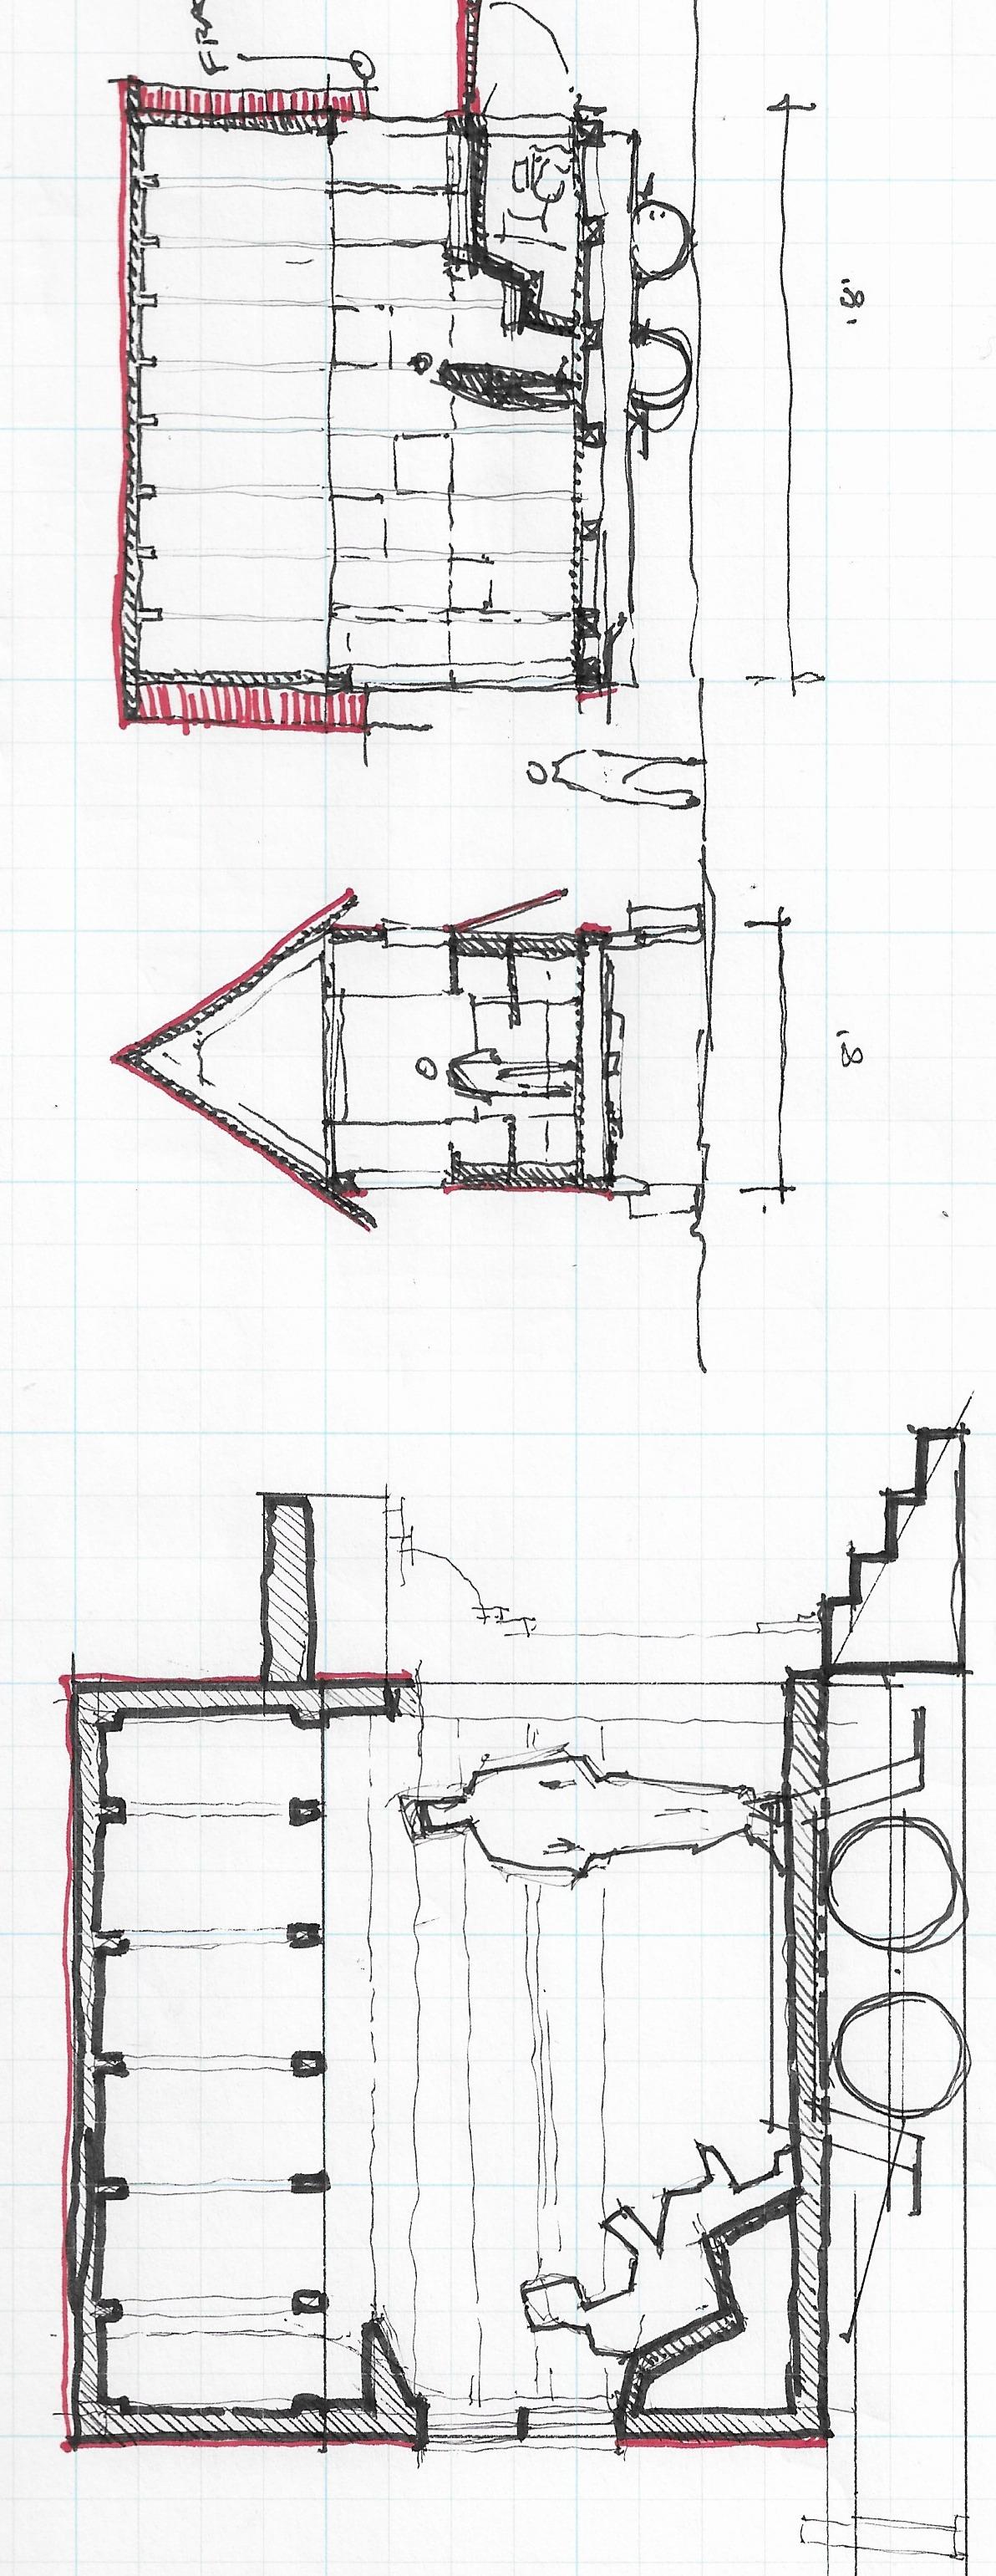 Sketch for early counter-monument design. Each neighborhood in Providence will in time be sent a structural frame upon which the inhabitants may work to place clapboard siding in whatever manner they sees fit.